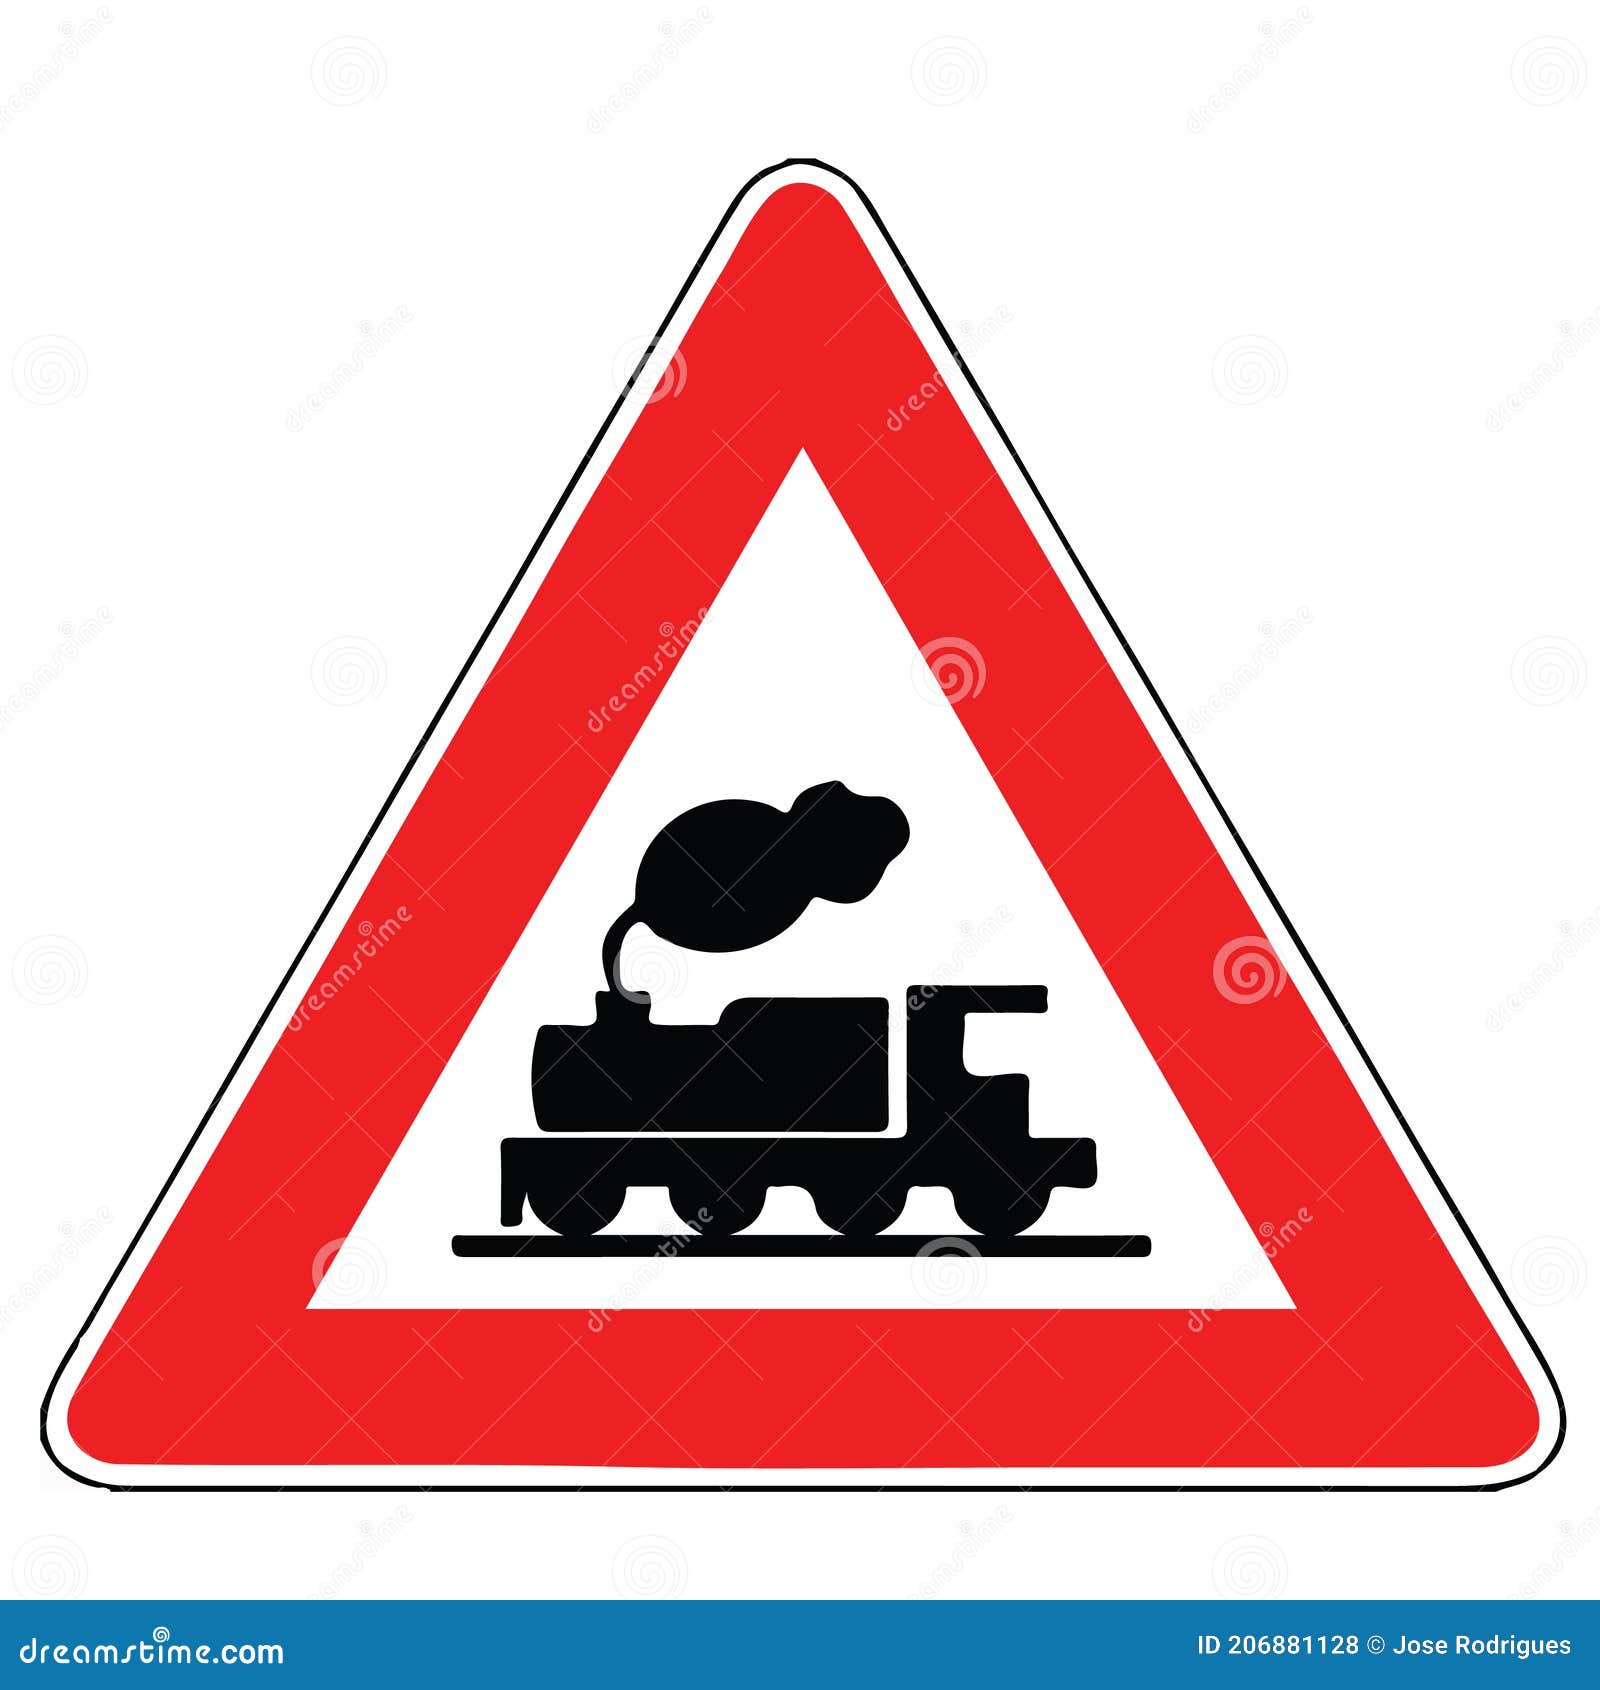 Street Danger Sign Road Information Symbol Indication Of Proximity Of A Level Crossing Without Gates Or Barriers Stock Vector Illustration Of Line Text